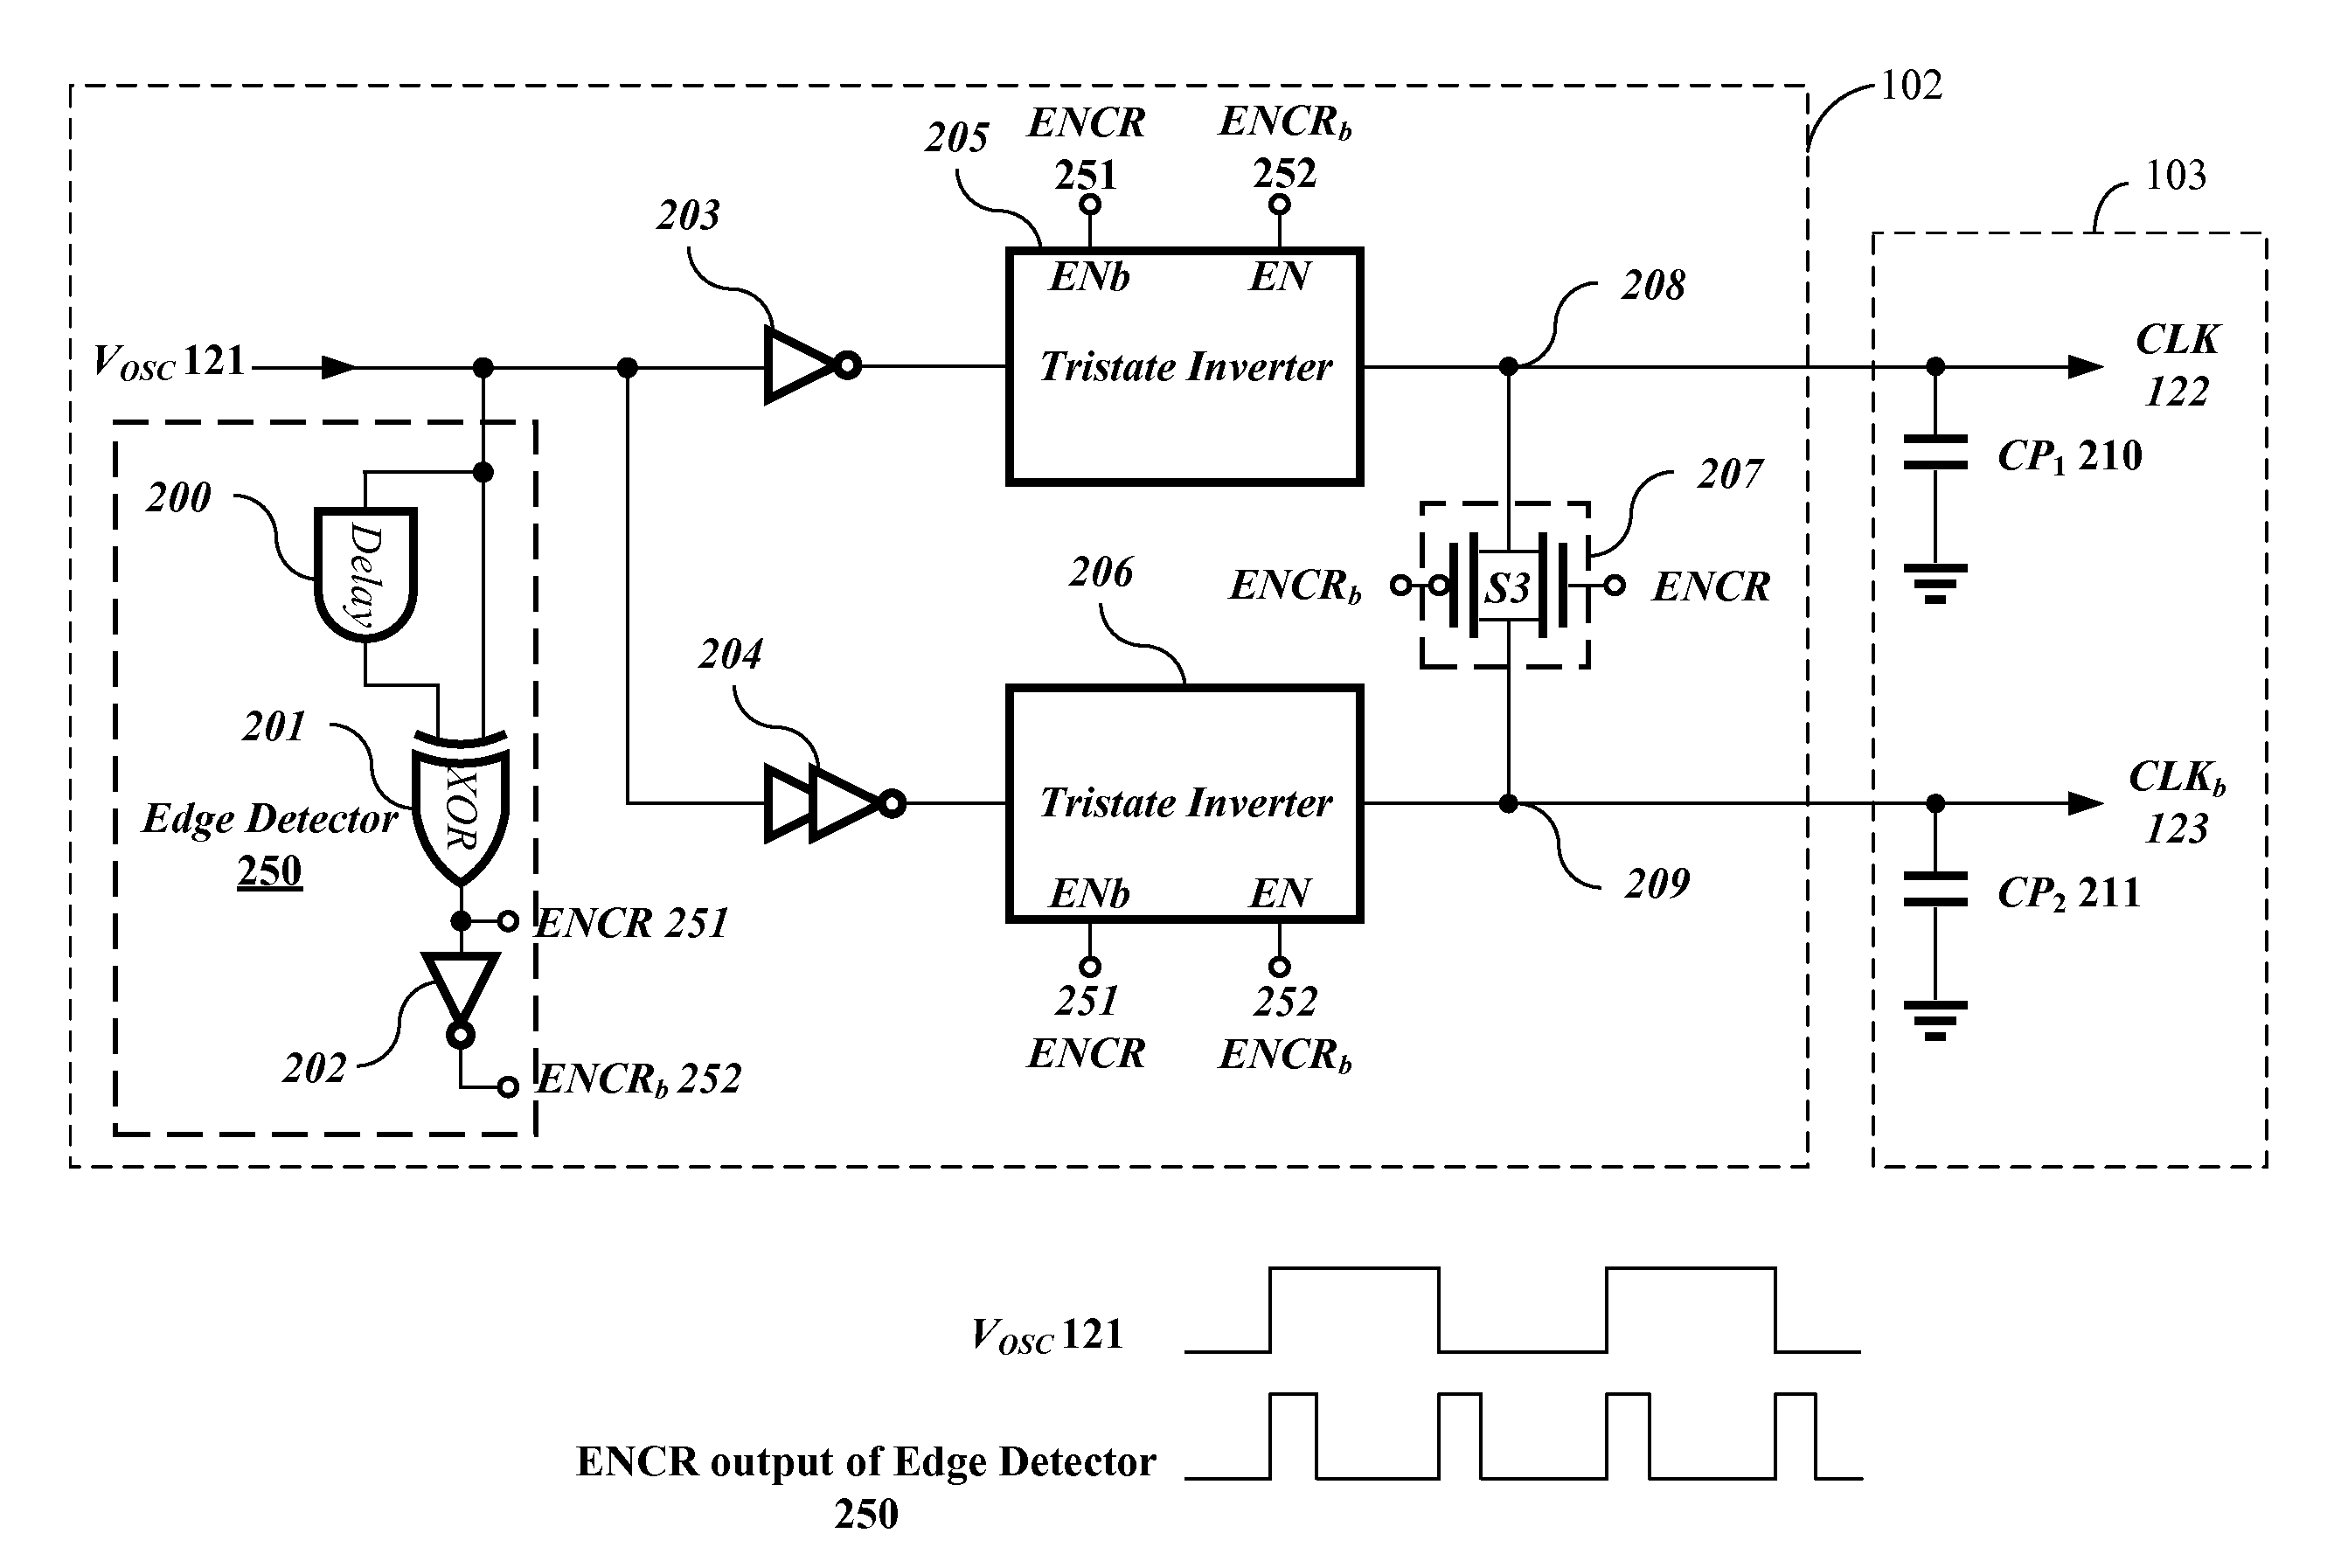 Systems, methods, and apparatuses for complementary metal oxide semiconductor (CMOS) driver circuits using shared-charge recycling charge pump structures